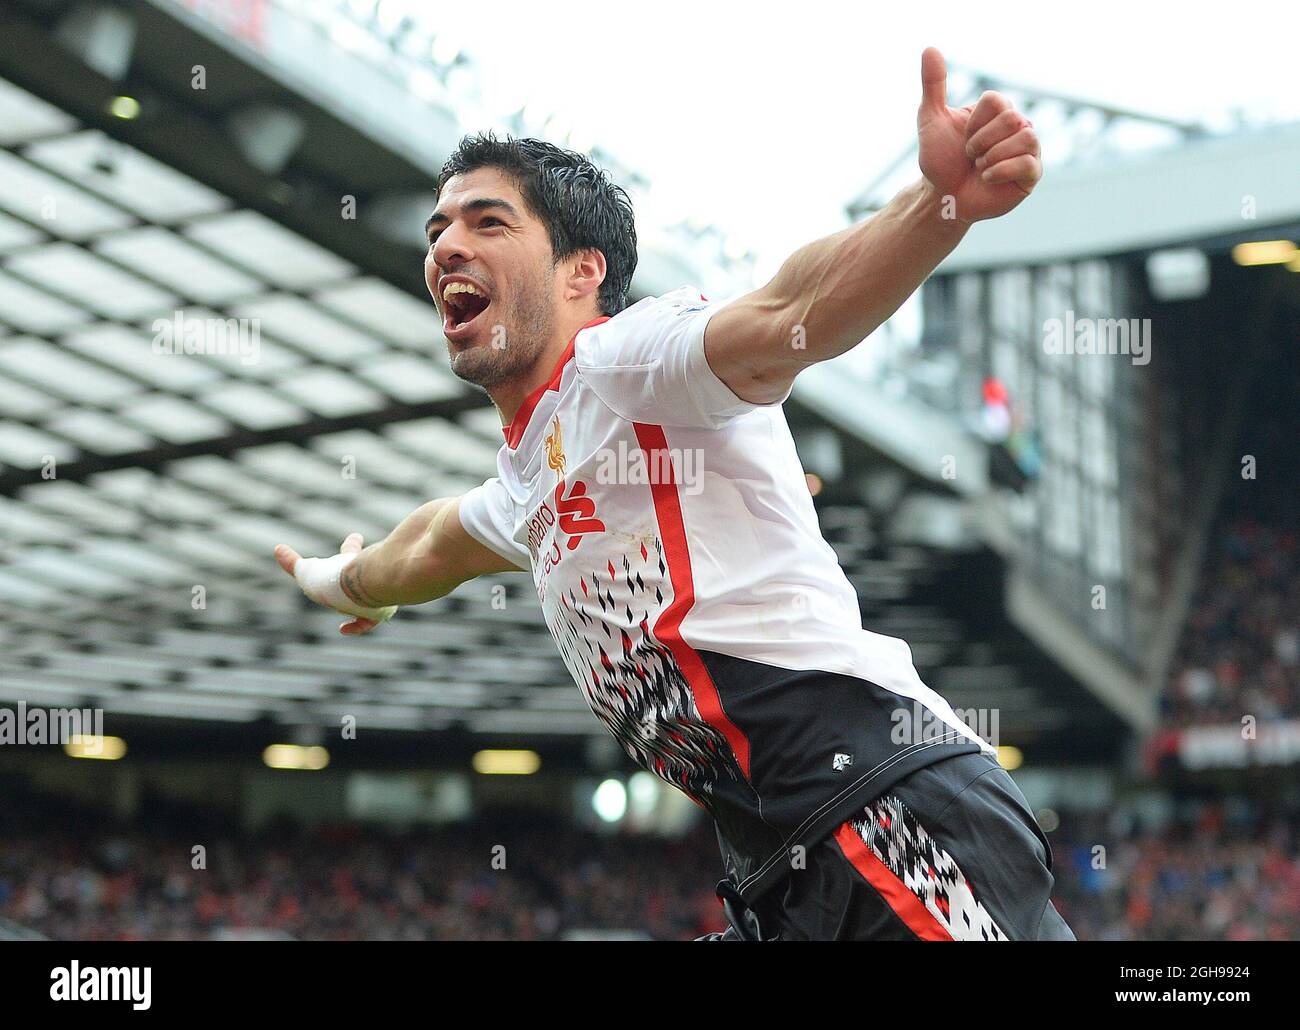 Luis Suarez of Liverpool celebrates scoring the third goal during the Barclays Premier League match between Manchester Utd and Liverpool at Old Trafford Stadium in Manchester, England on March 16, 2014. Pic Simon Bellis Stock Photo